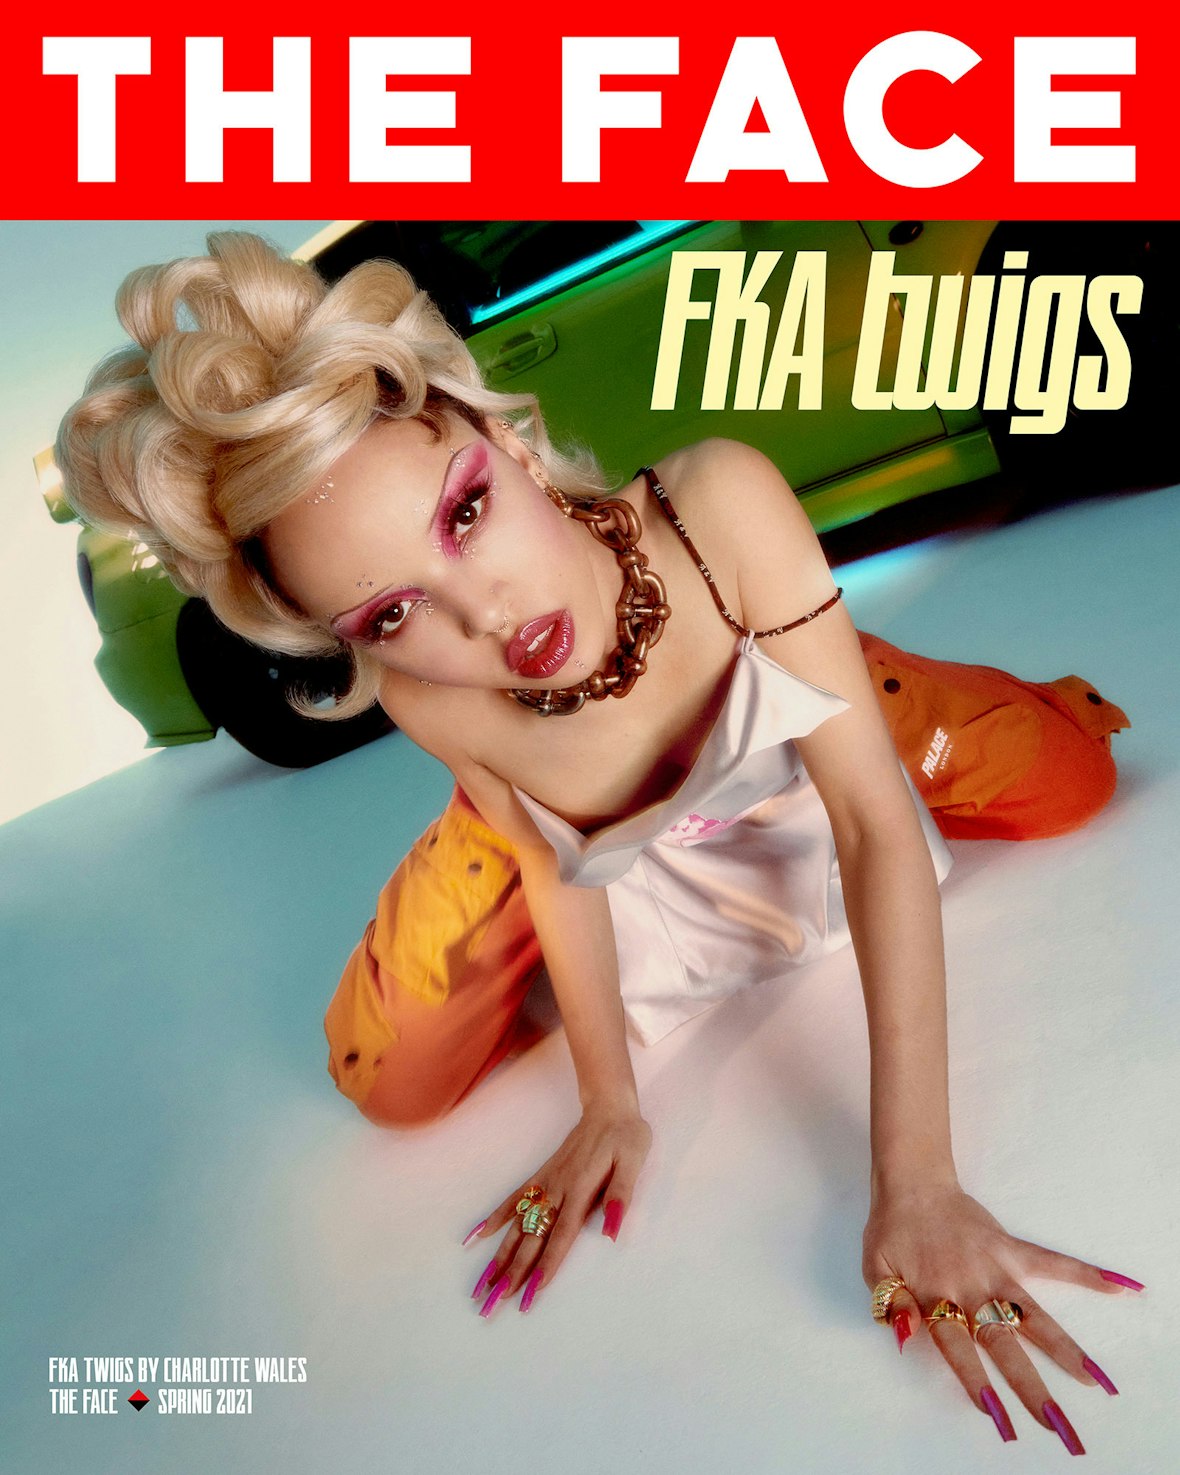 THEFACE006_COVER-SOCIAL_FKAtwigs.jpg?fit